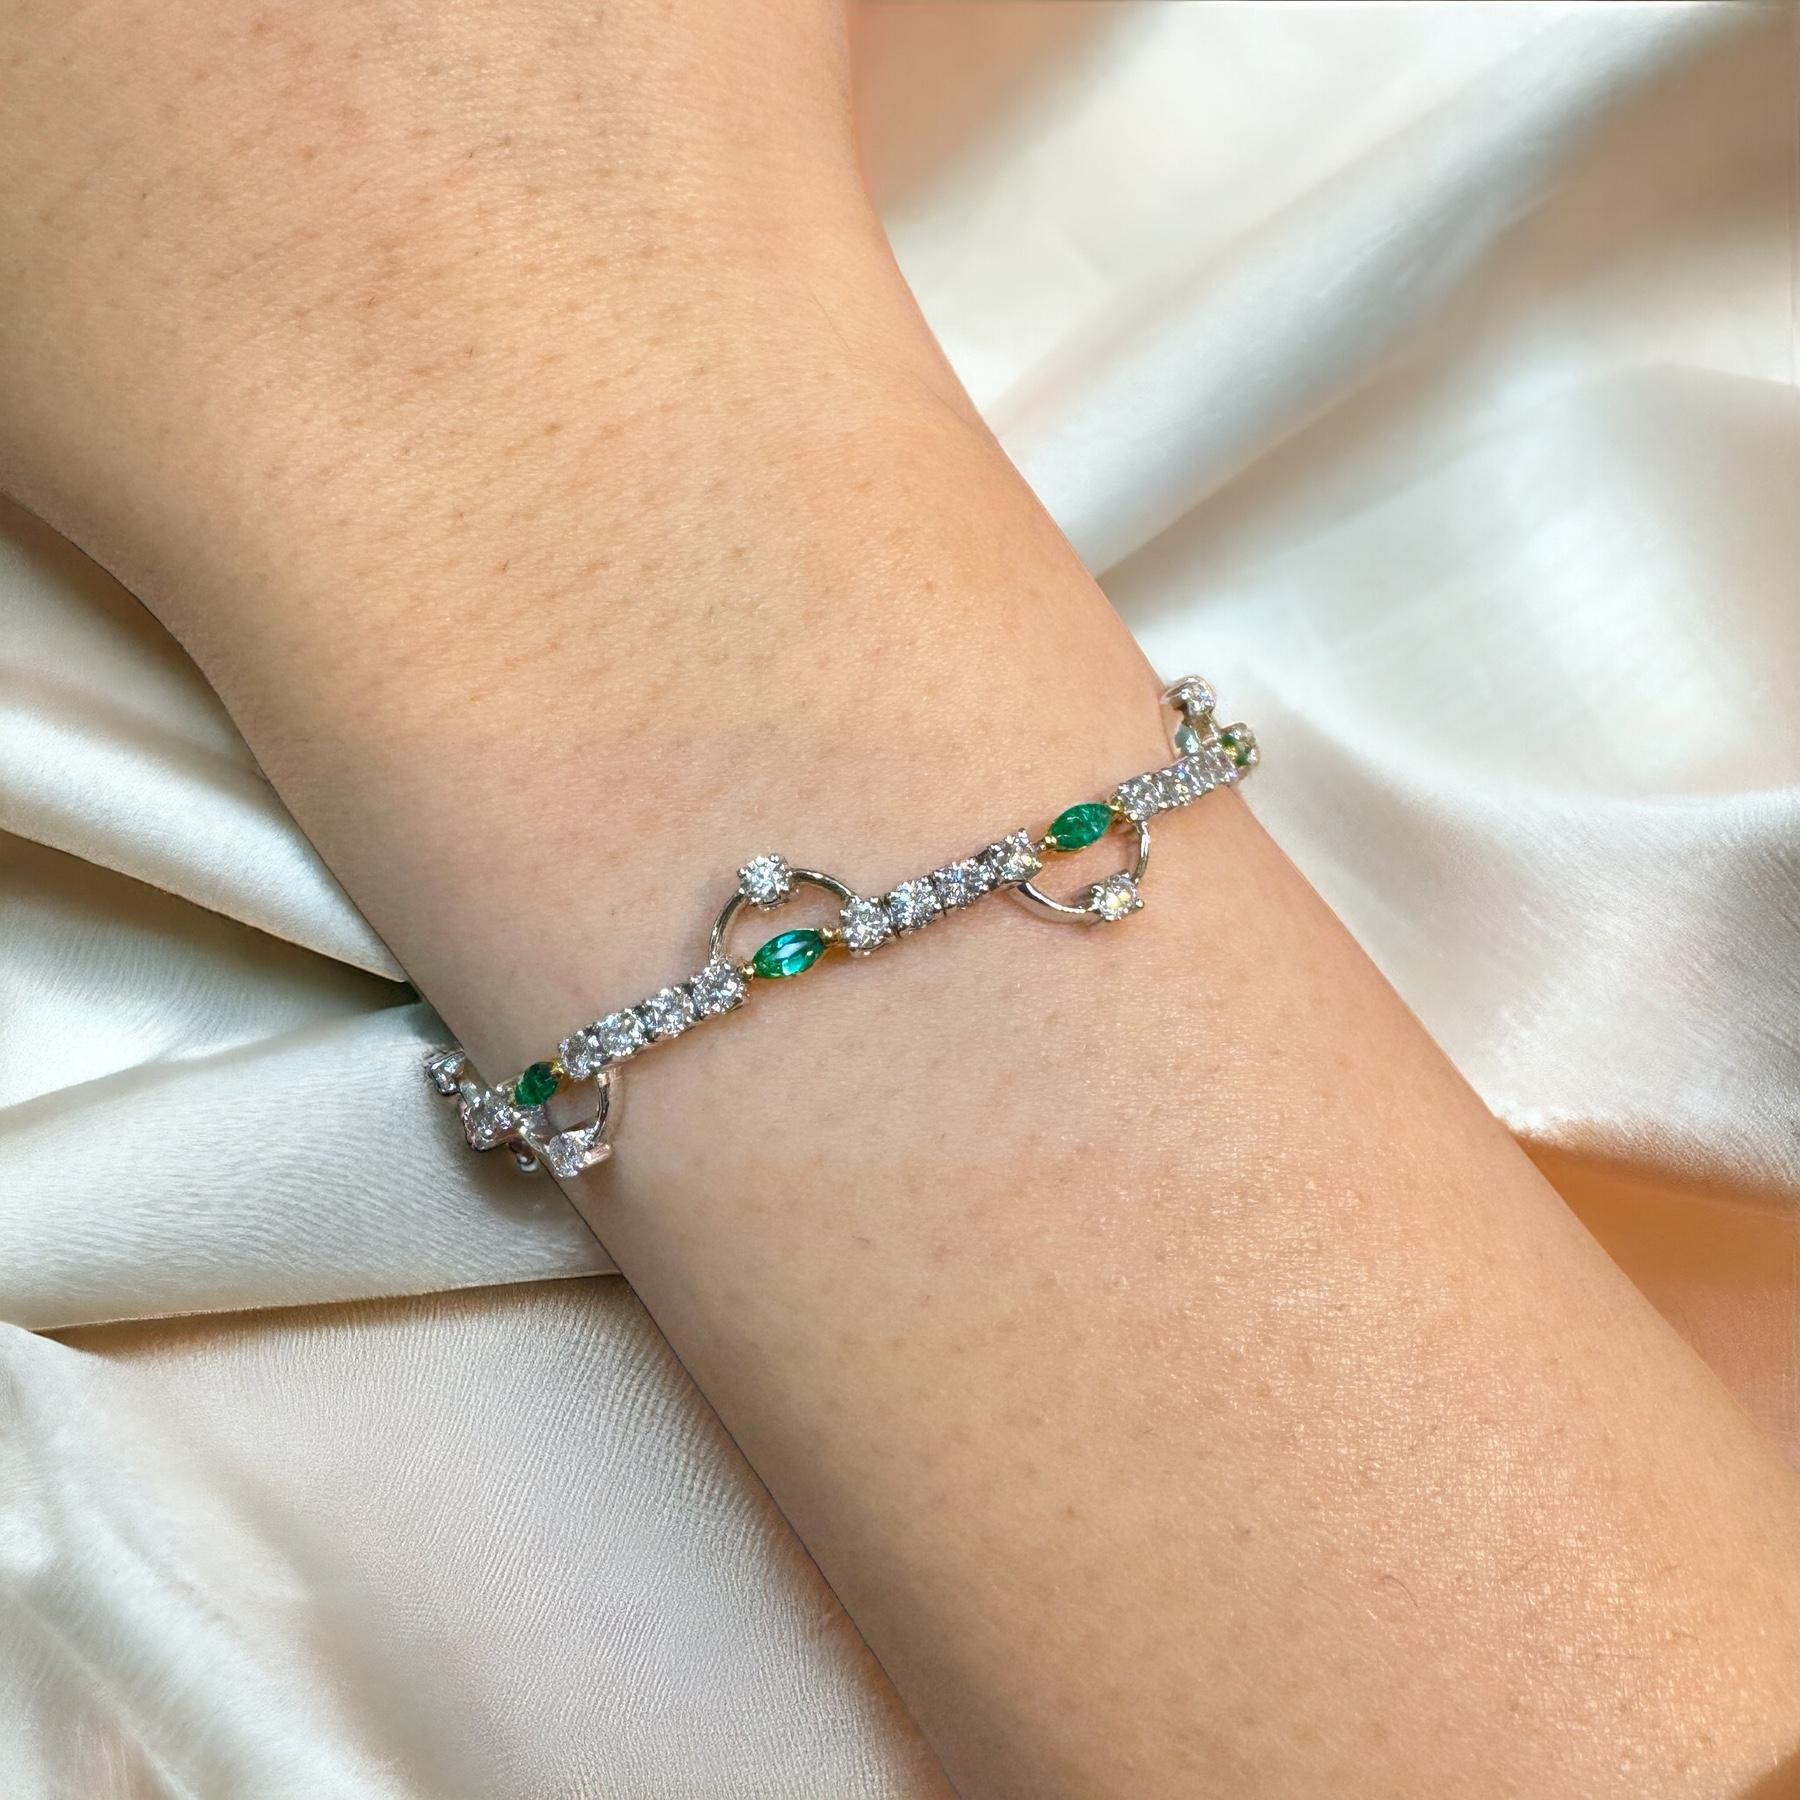 Natural Emerald & Diamond Charm Bracelet in 18K White Gold. 

Natural Marquise cut 10 pieces of emerald, weighing 0.72 carats total. 51 round-cut diamonds totaling 2.08 carats. All set in 18K white gold, weighing 7.34 grams with a 6.5 inch length.